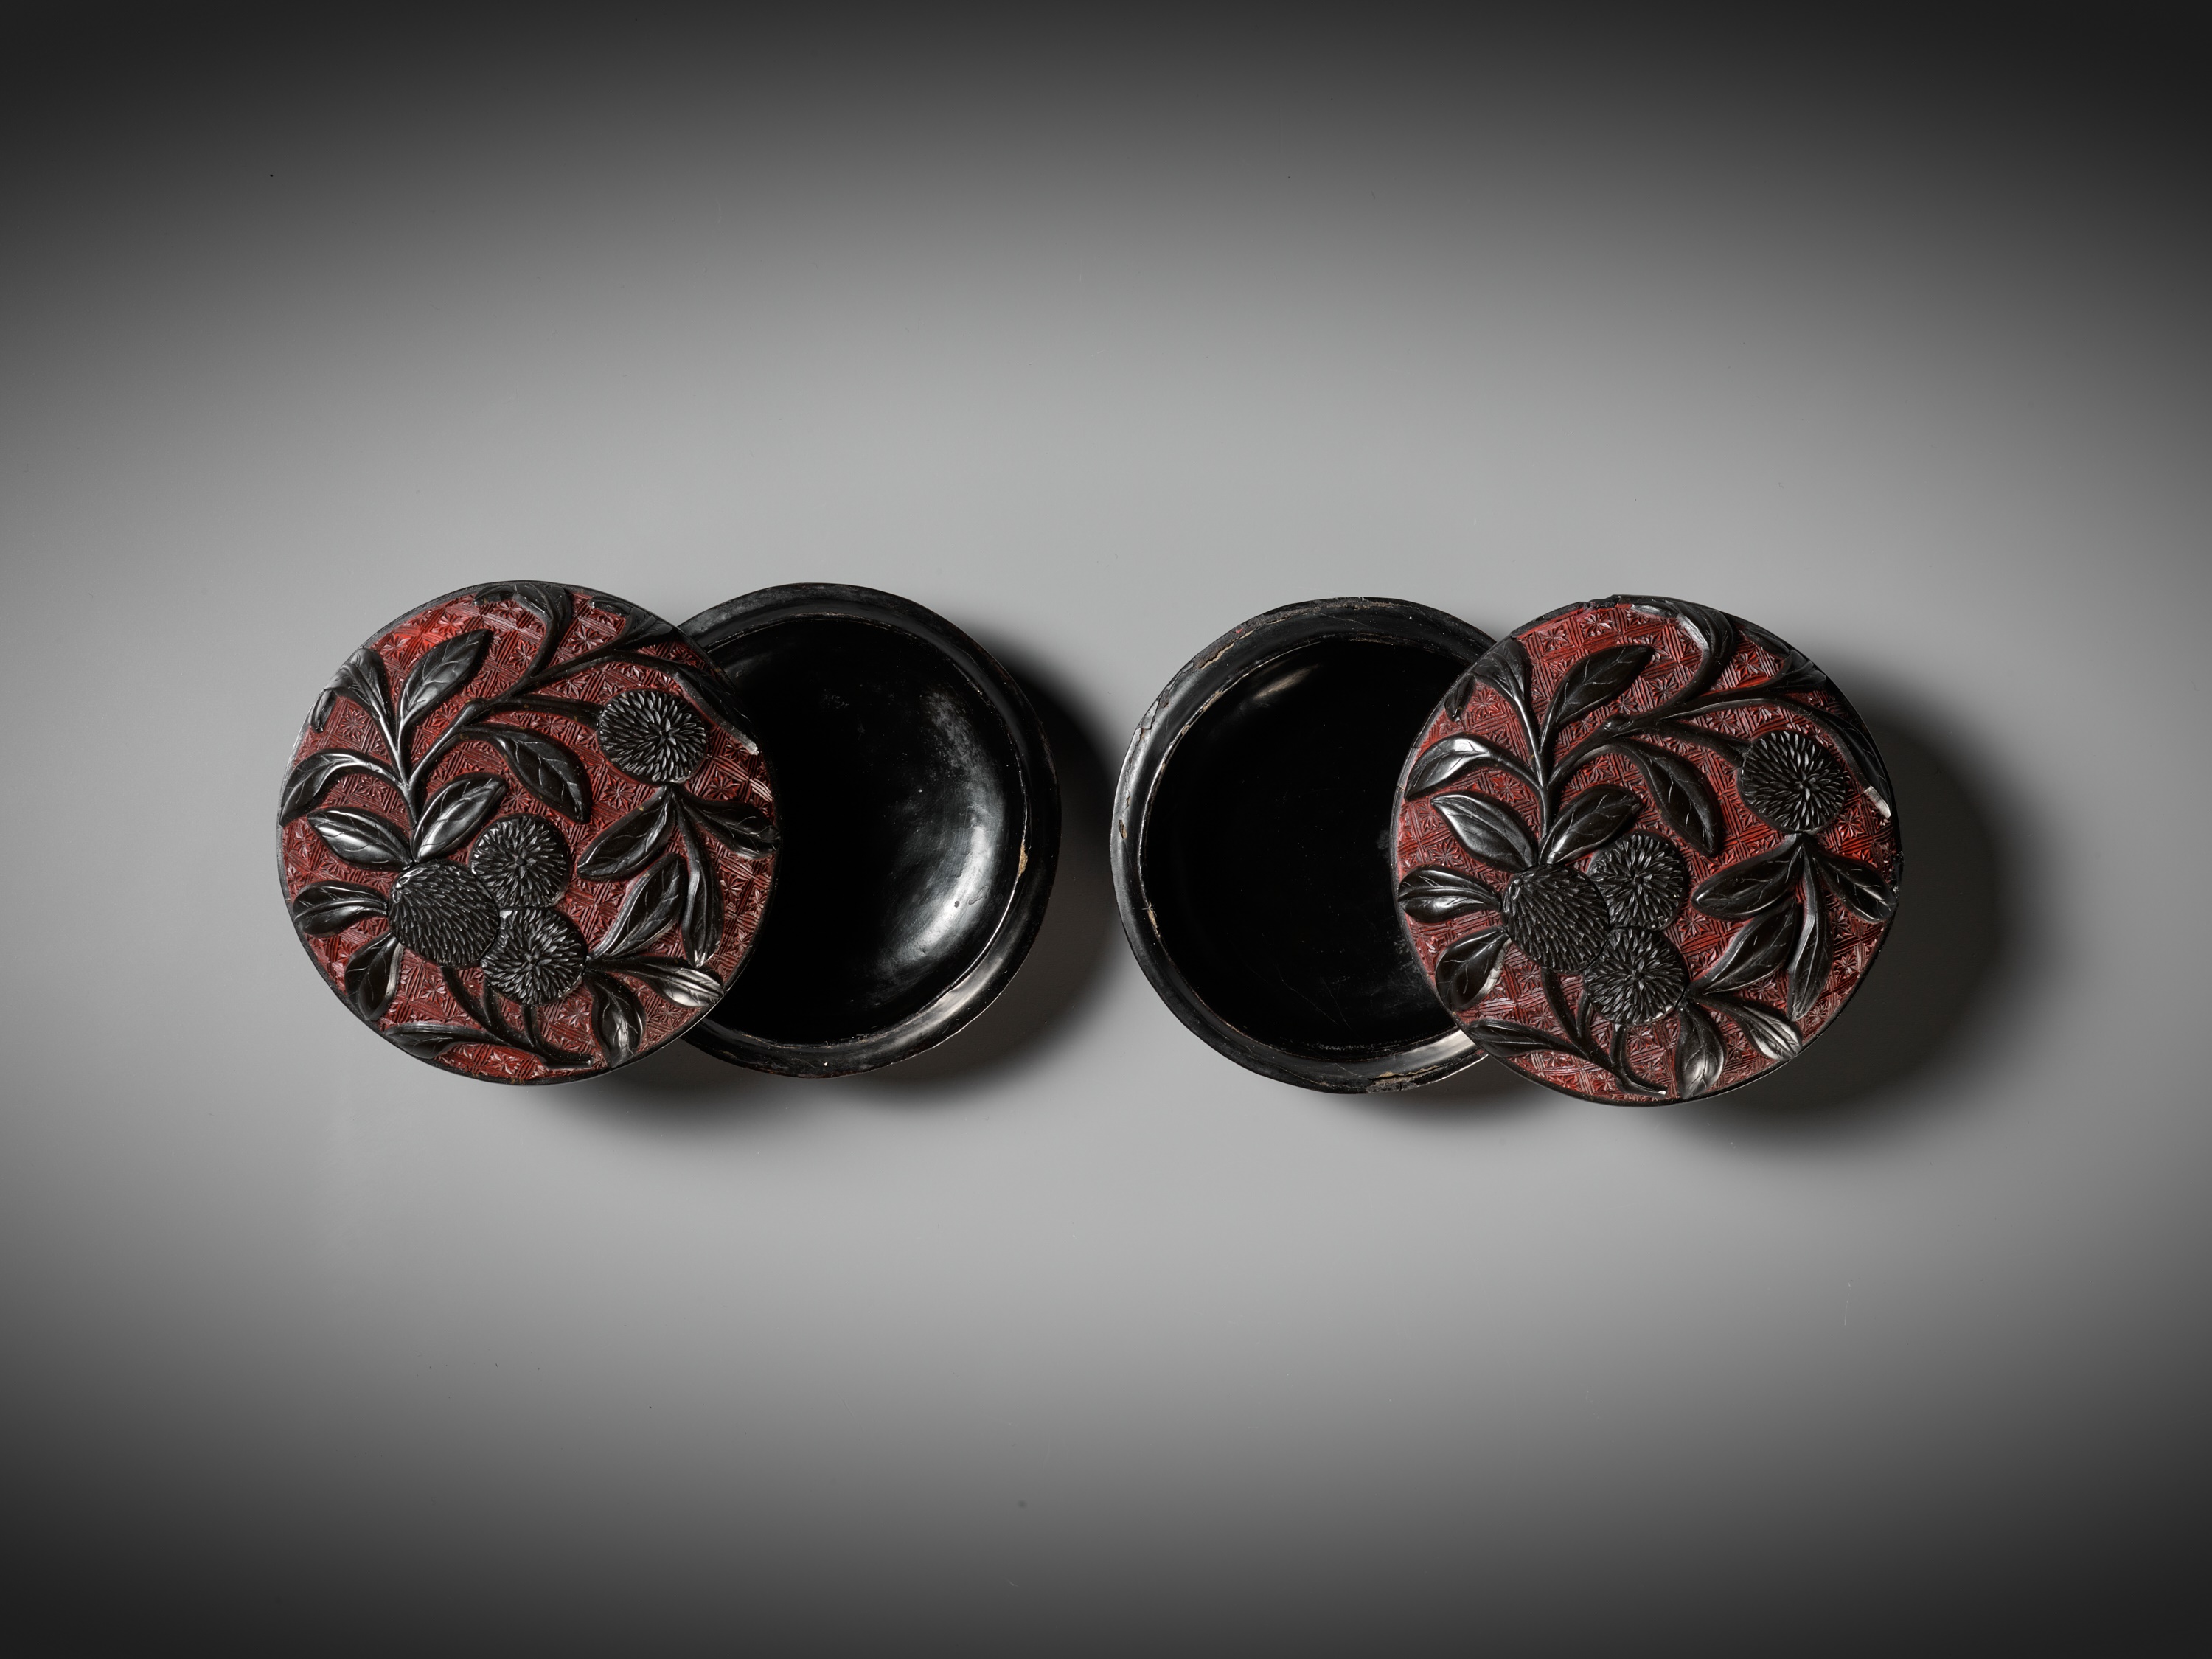 A PAIR OF RED AND BLACK LACQUER 'LYCHEE' BOXES AND COVERS, MING DYNASTY - Image 7 of 11